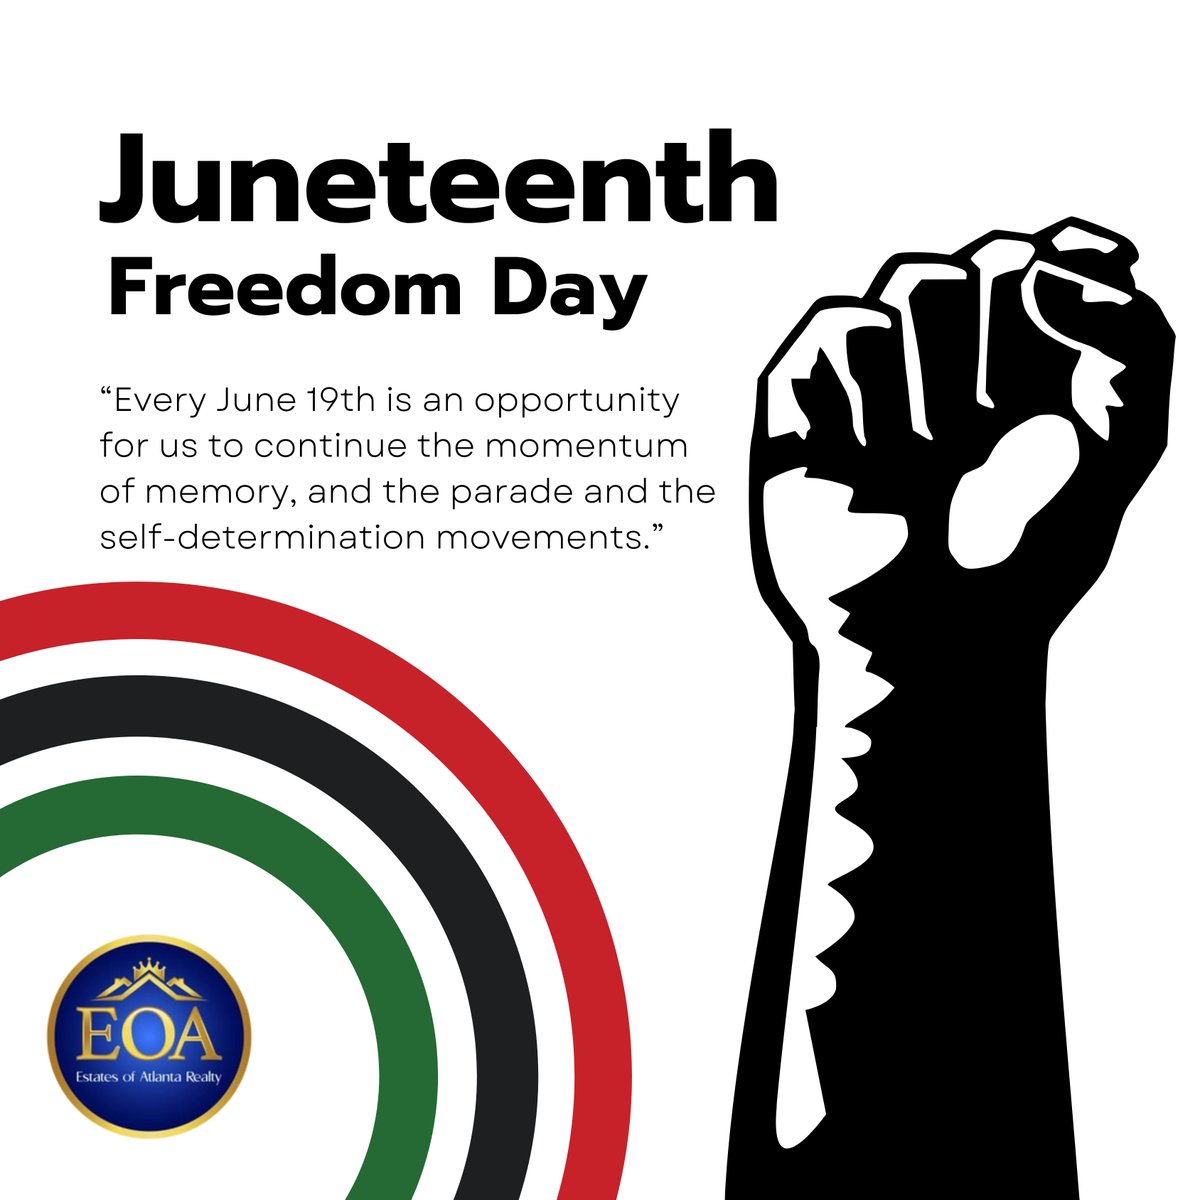 Happy Juneteenth, Everyone! 💛❤️🖤
Celebrating the end of long-legalized slavery and the creation of a world where justice serves equality.🙏🏿🙌🏿🤝🏾
.
#Juneteenth #Juneteenth2023 #FreedomDay #BlackLiberation #CelebratingFreedom